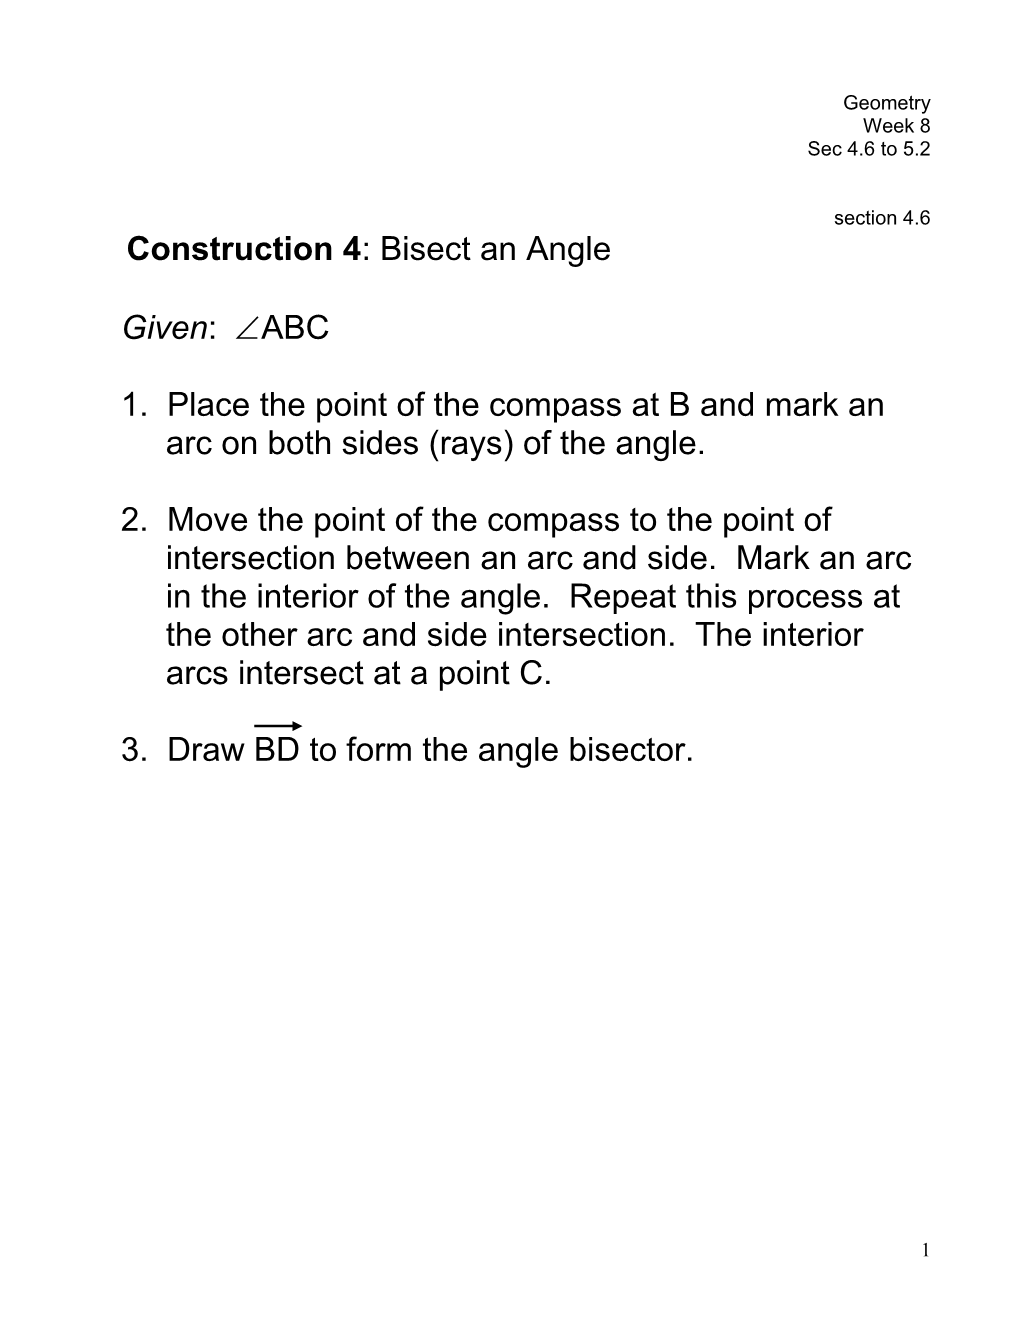 Construction 4: Bisect an Angle